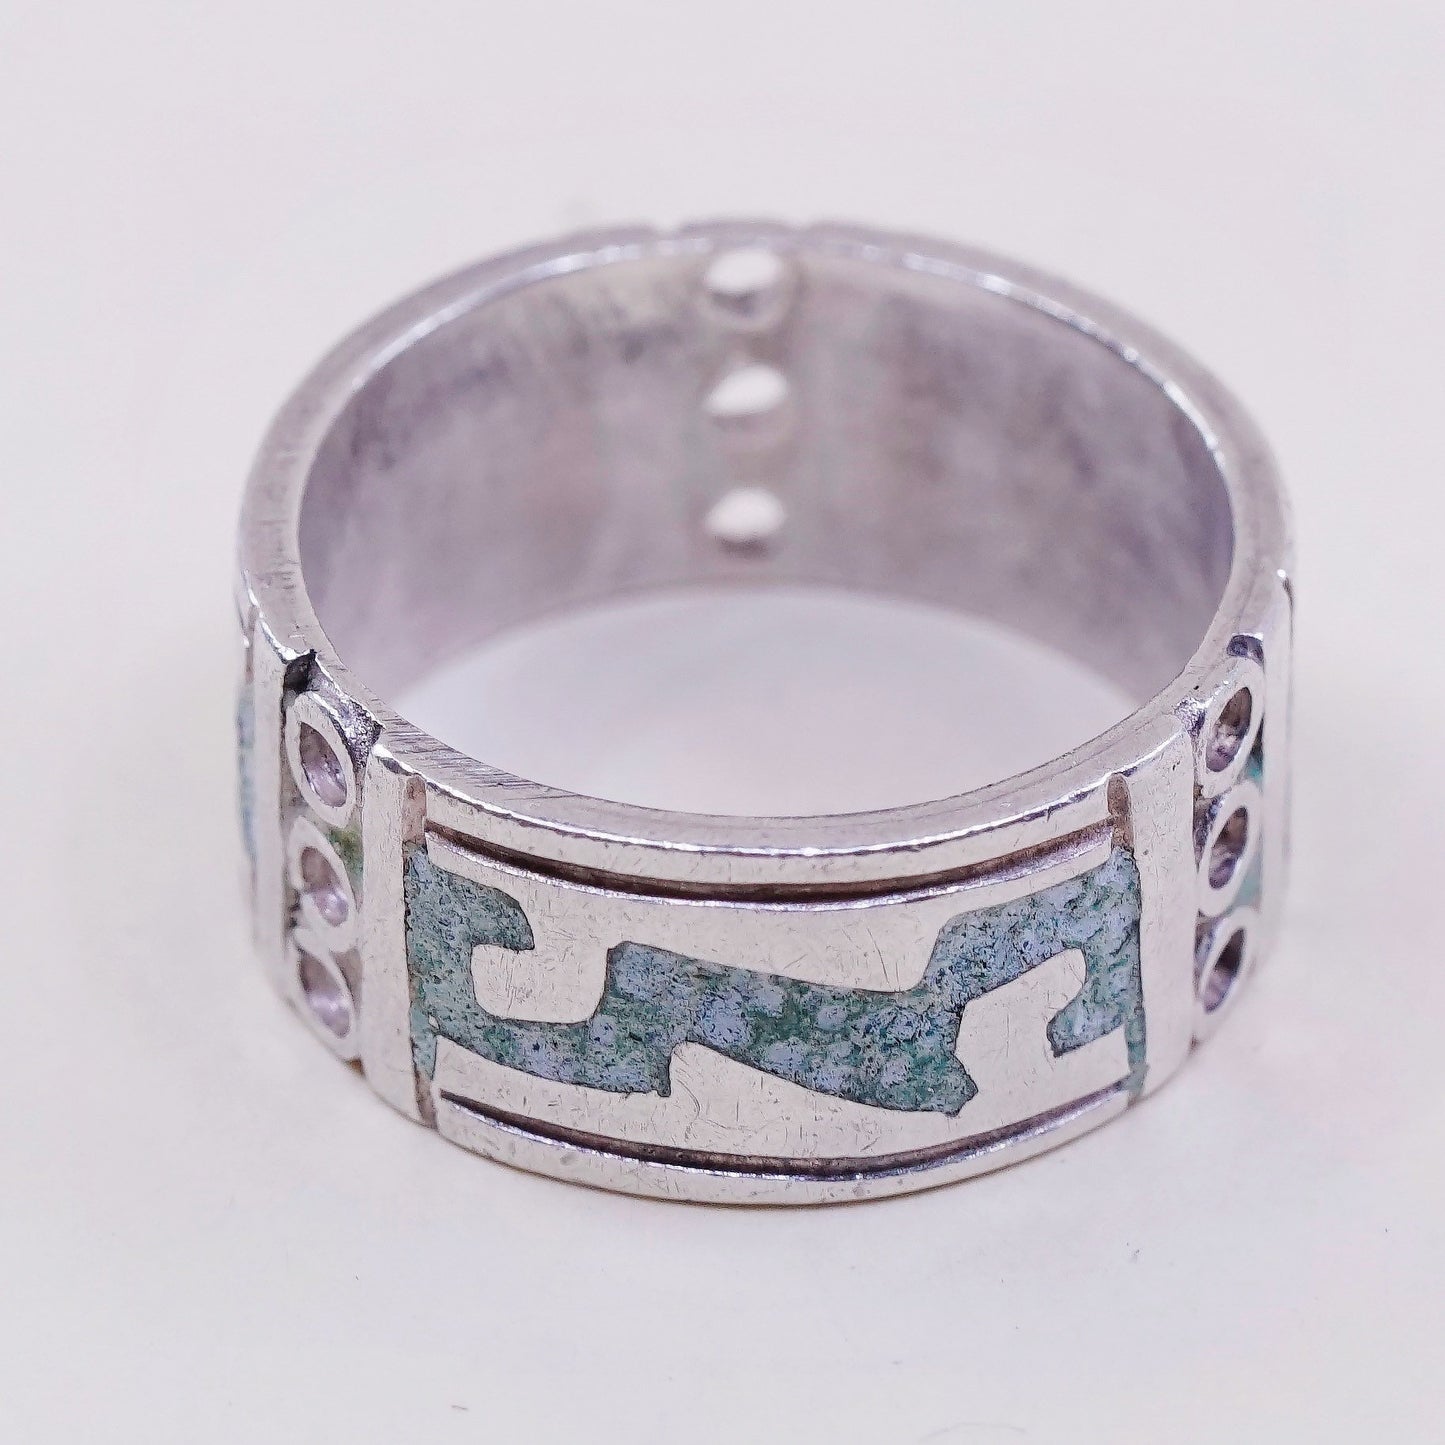 sz 8, VTG taxco mexico Sterling 925 silver handmade ring band w/ turquoise